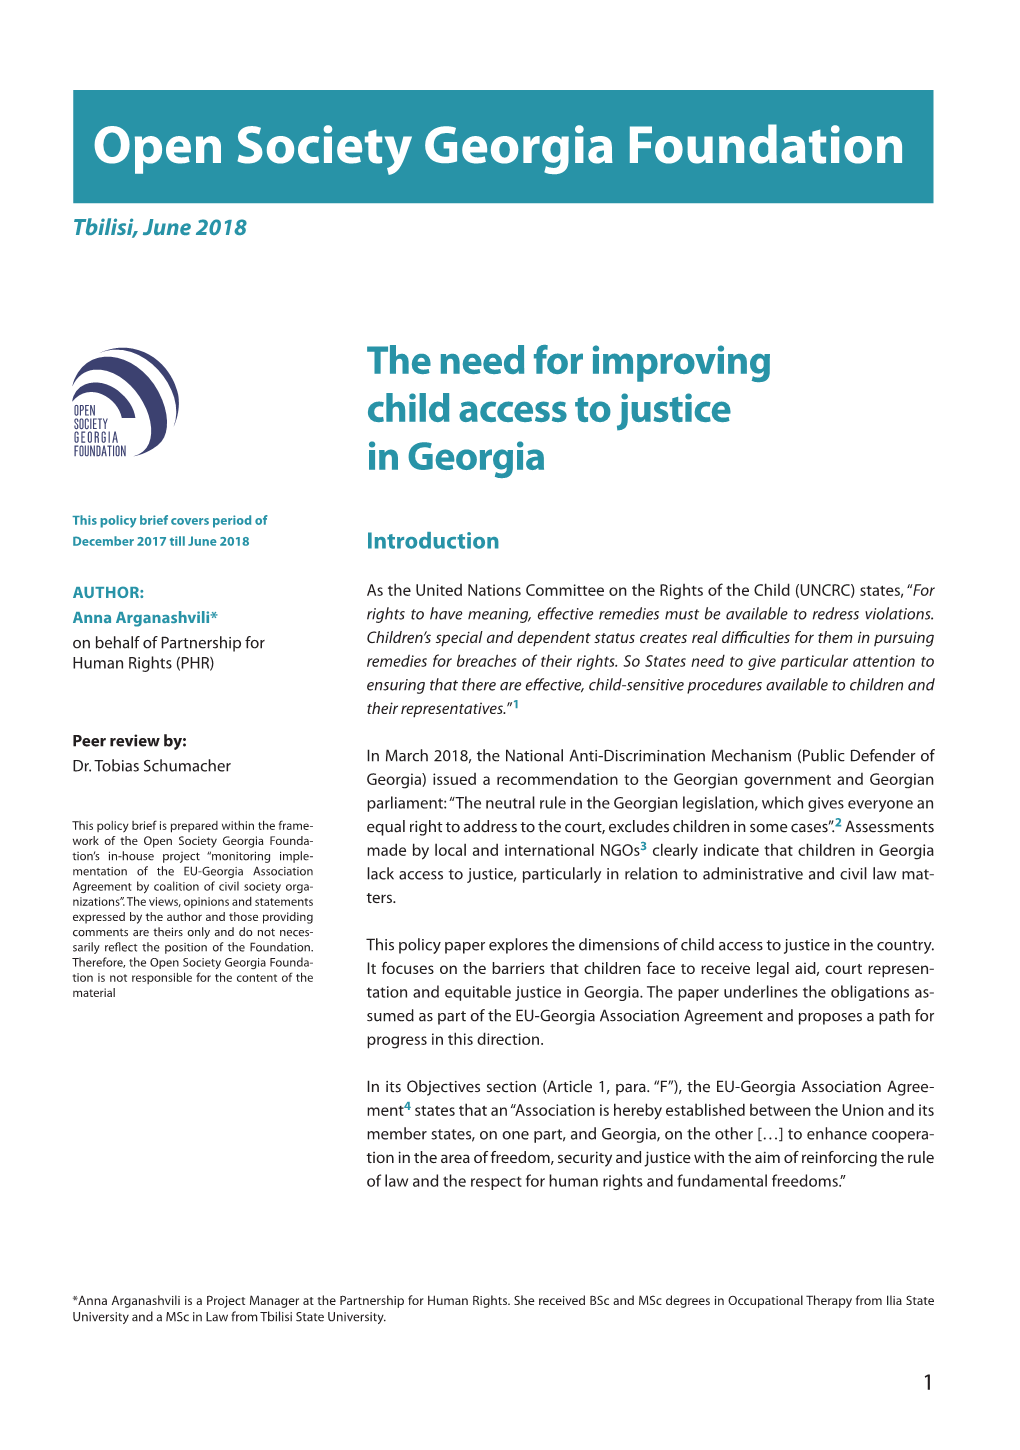 The Need for Improving Child Access to Justice in Georgia